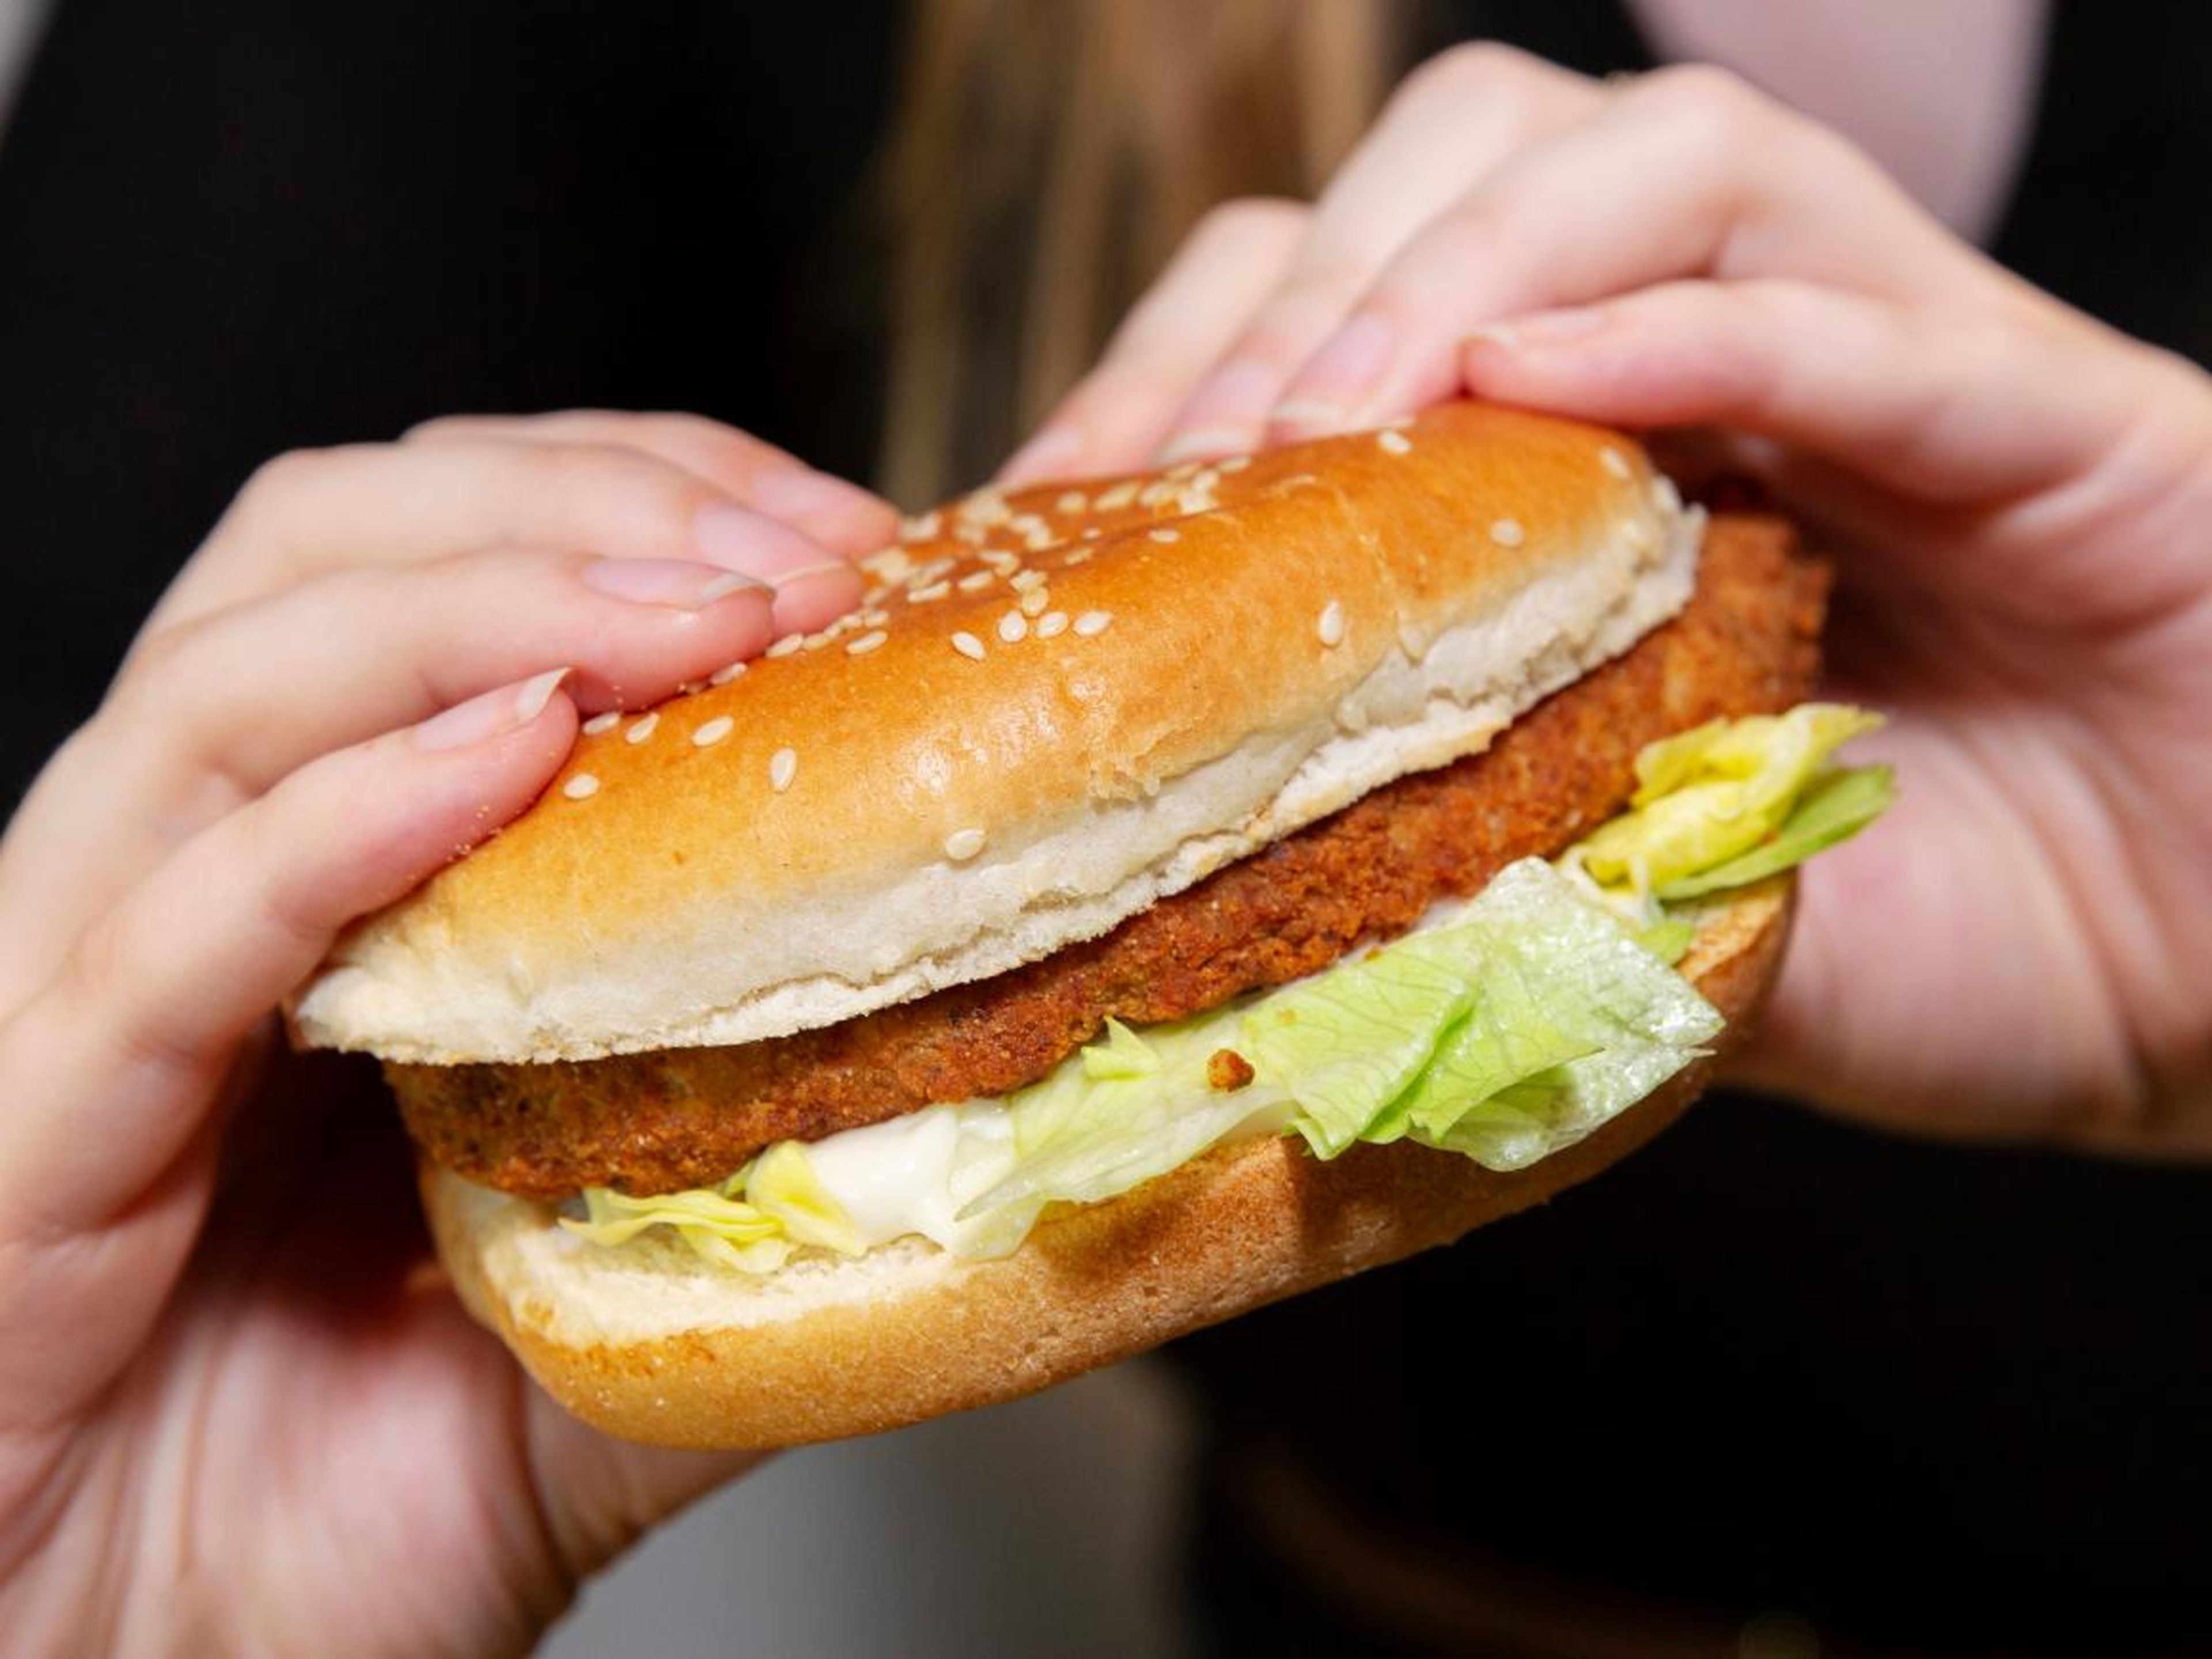 KFC's new 'Imposter Burger' is entirely vegan.